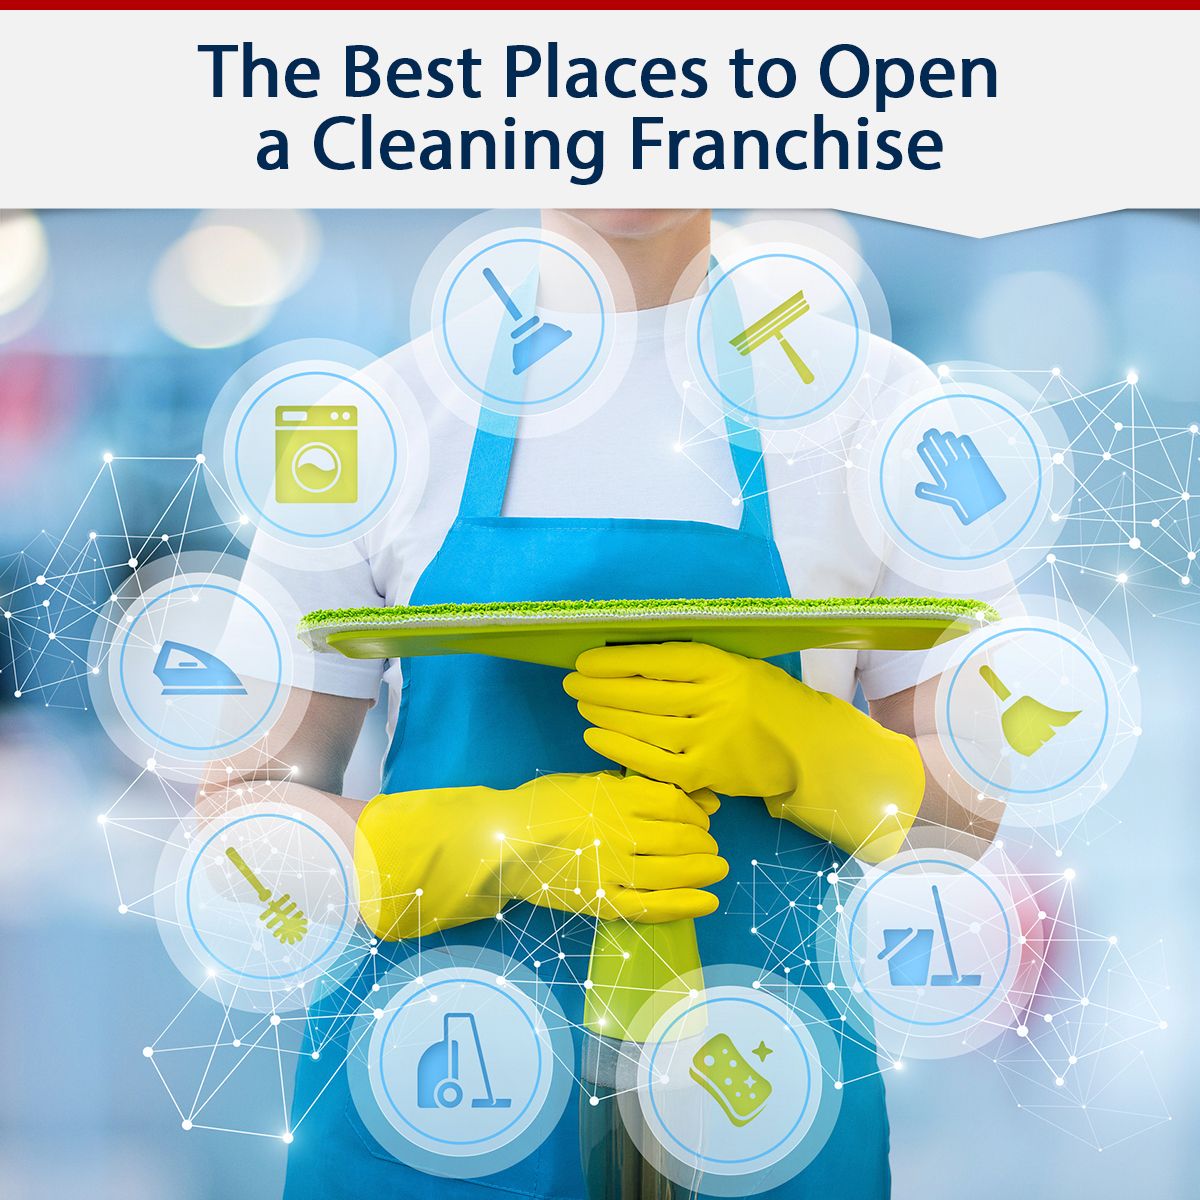 The Best Places to Open a Cleaning Franchise